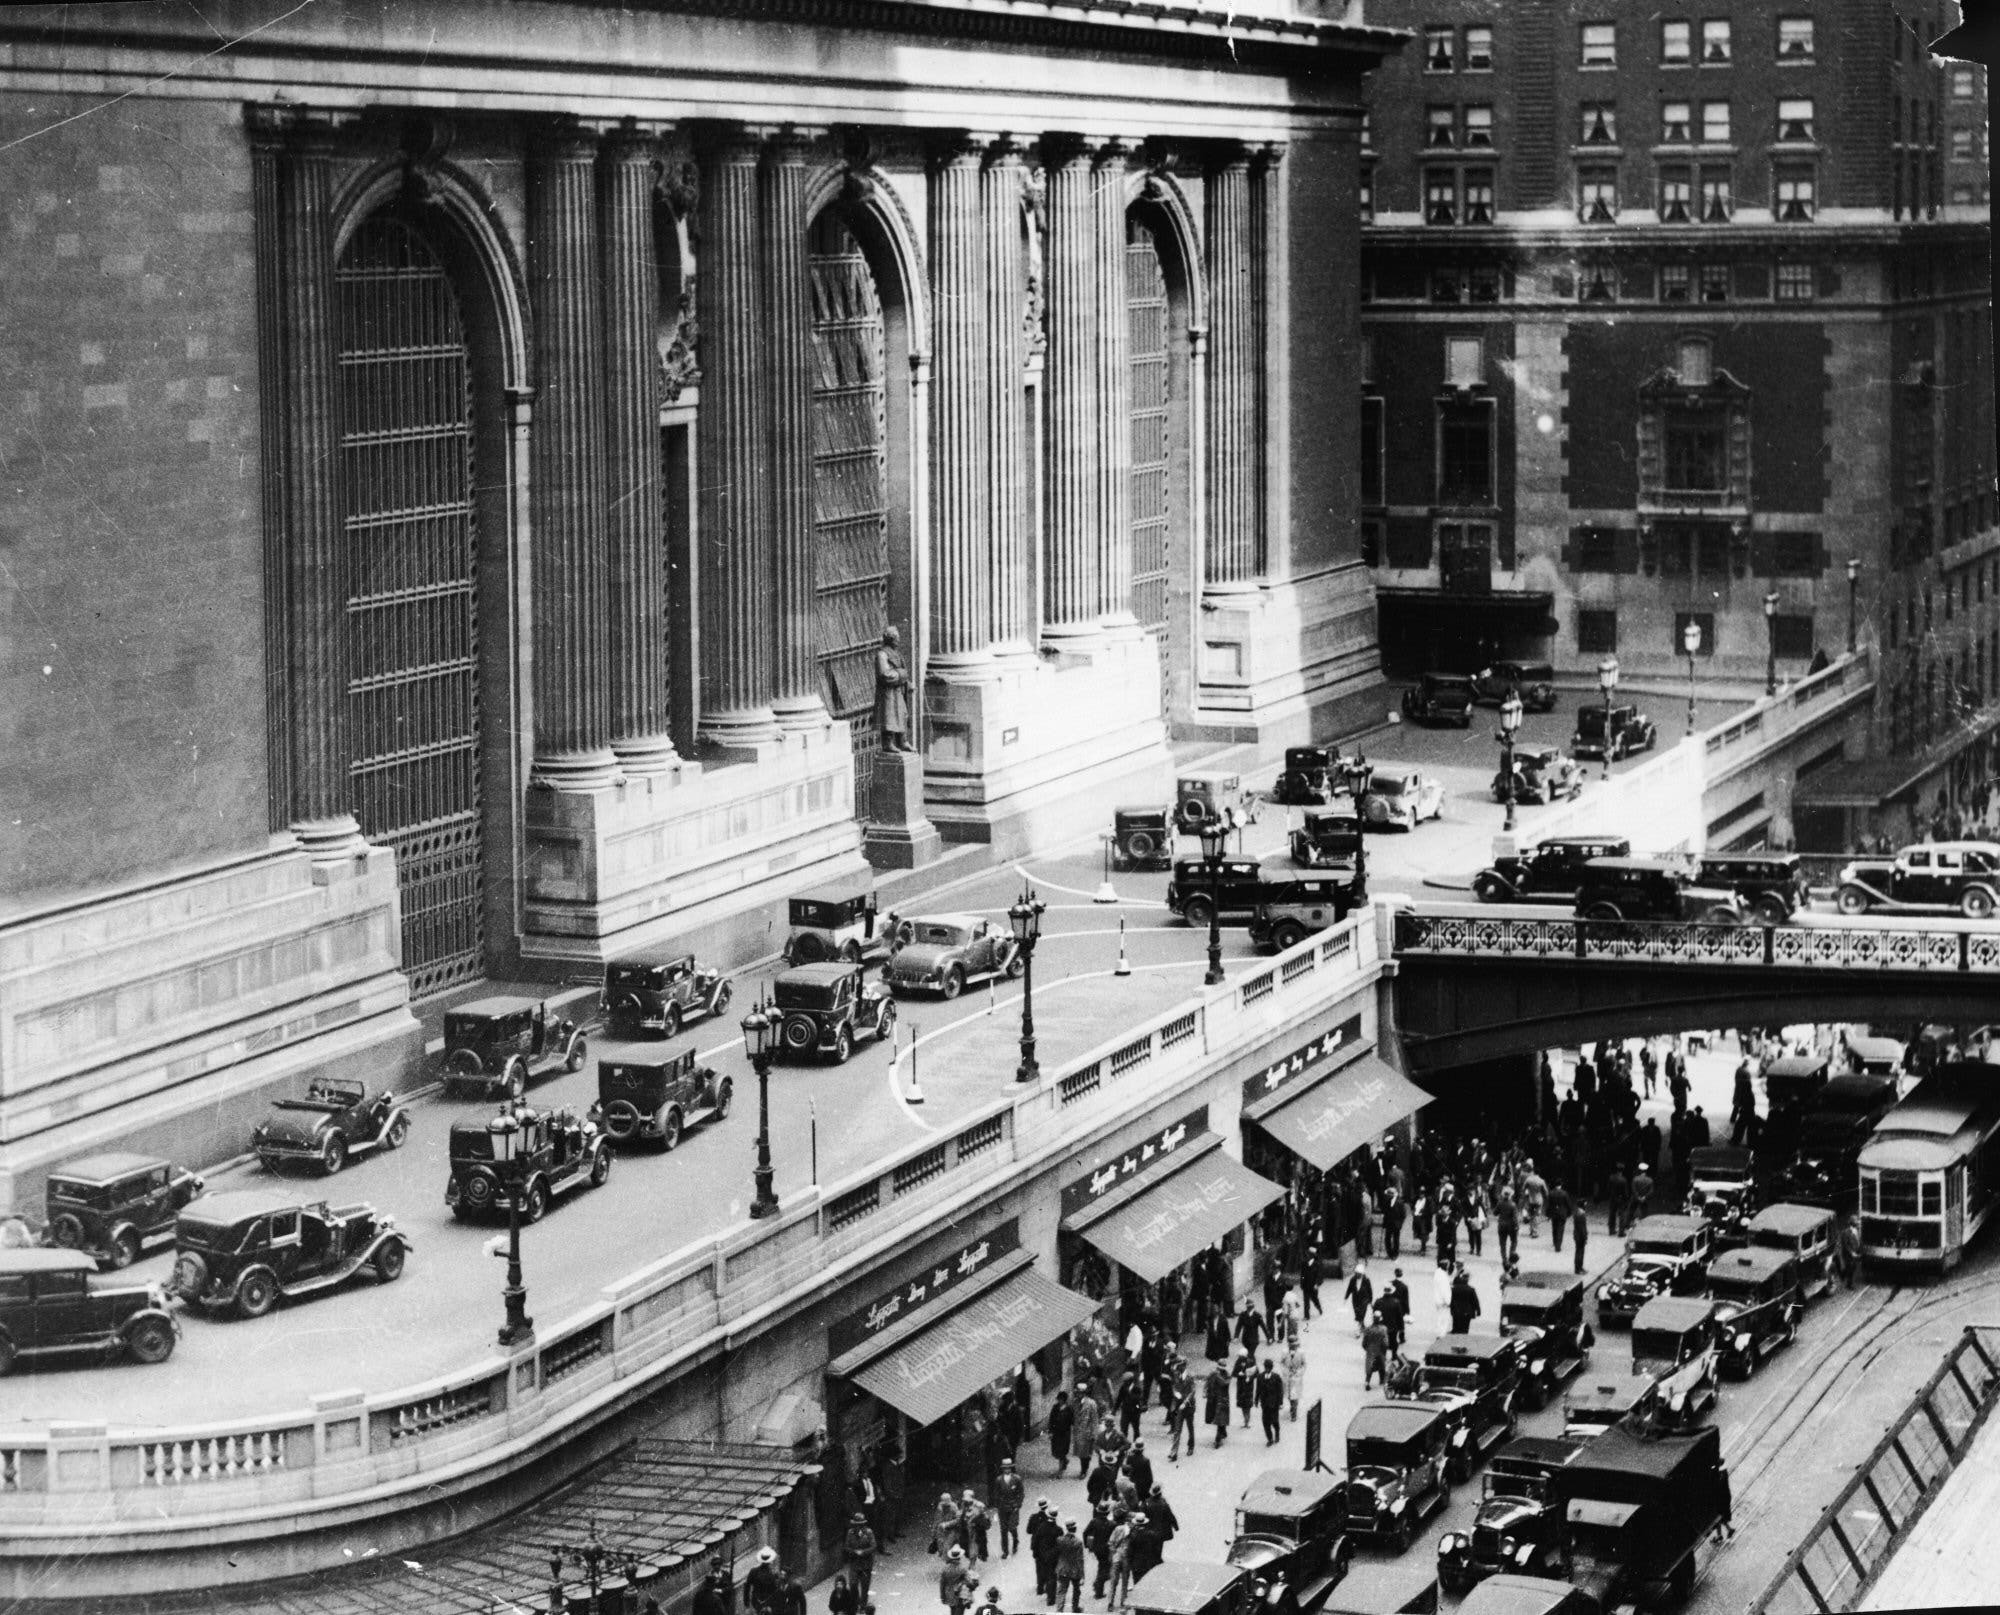 General 2000x1615 monochrome old photos cityscape people New York City Grand Central Station 1930's USA traffic street car vintage